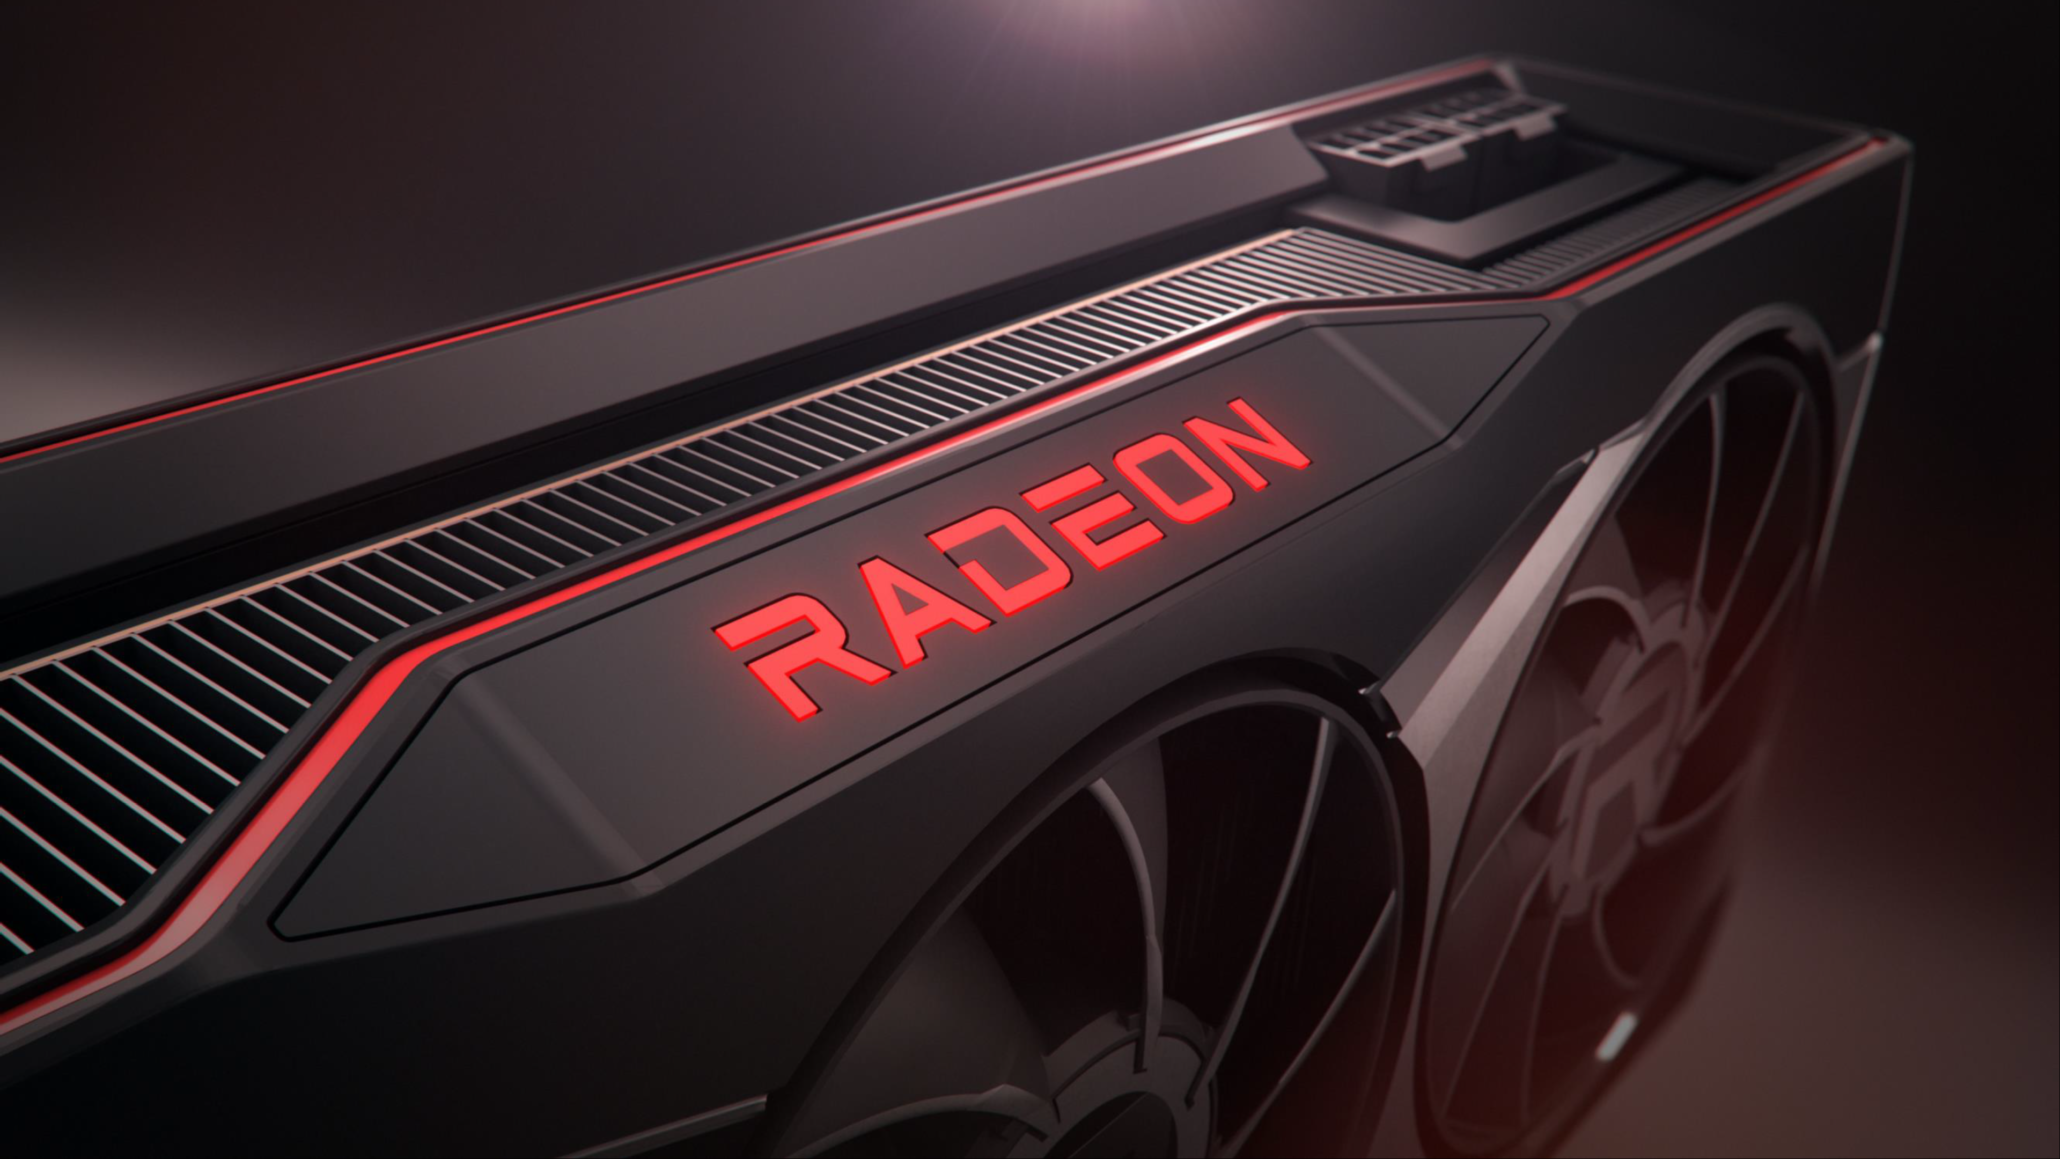 AMD rumored to quietly end production of Radeon RX 6650 XT - Neowin